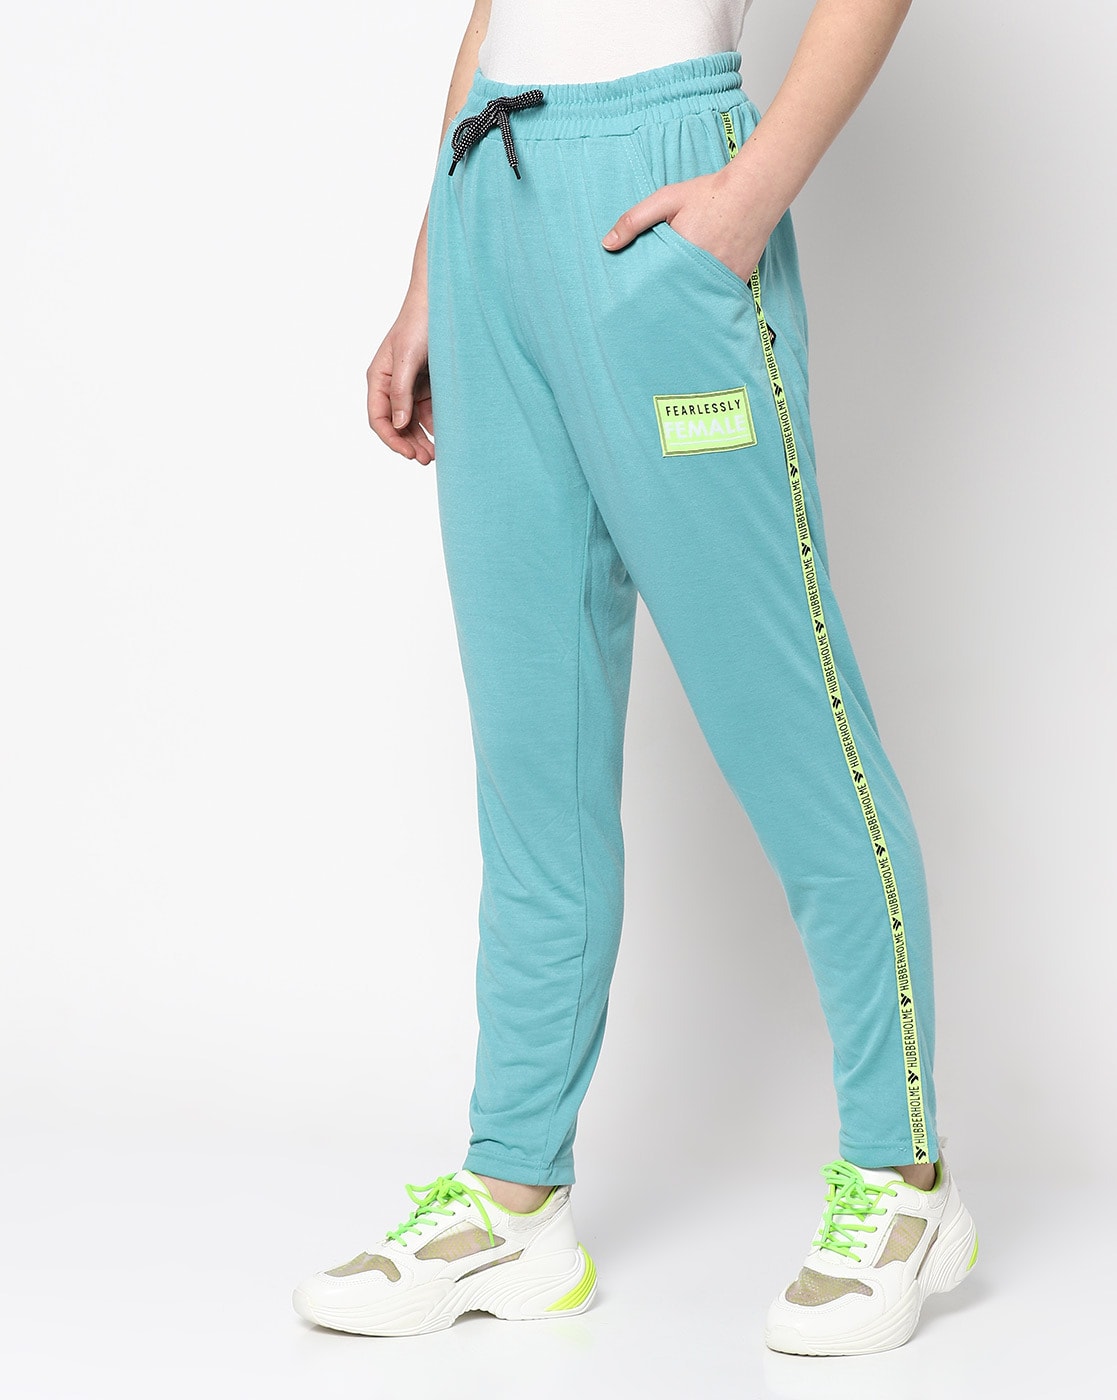 Mandala Natural Dye Track Pants for women in the color Sky Blue